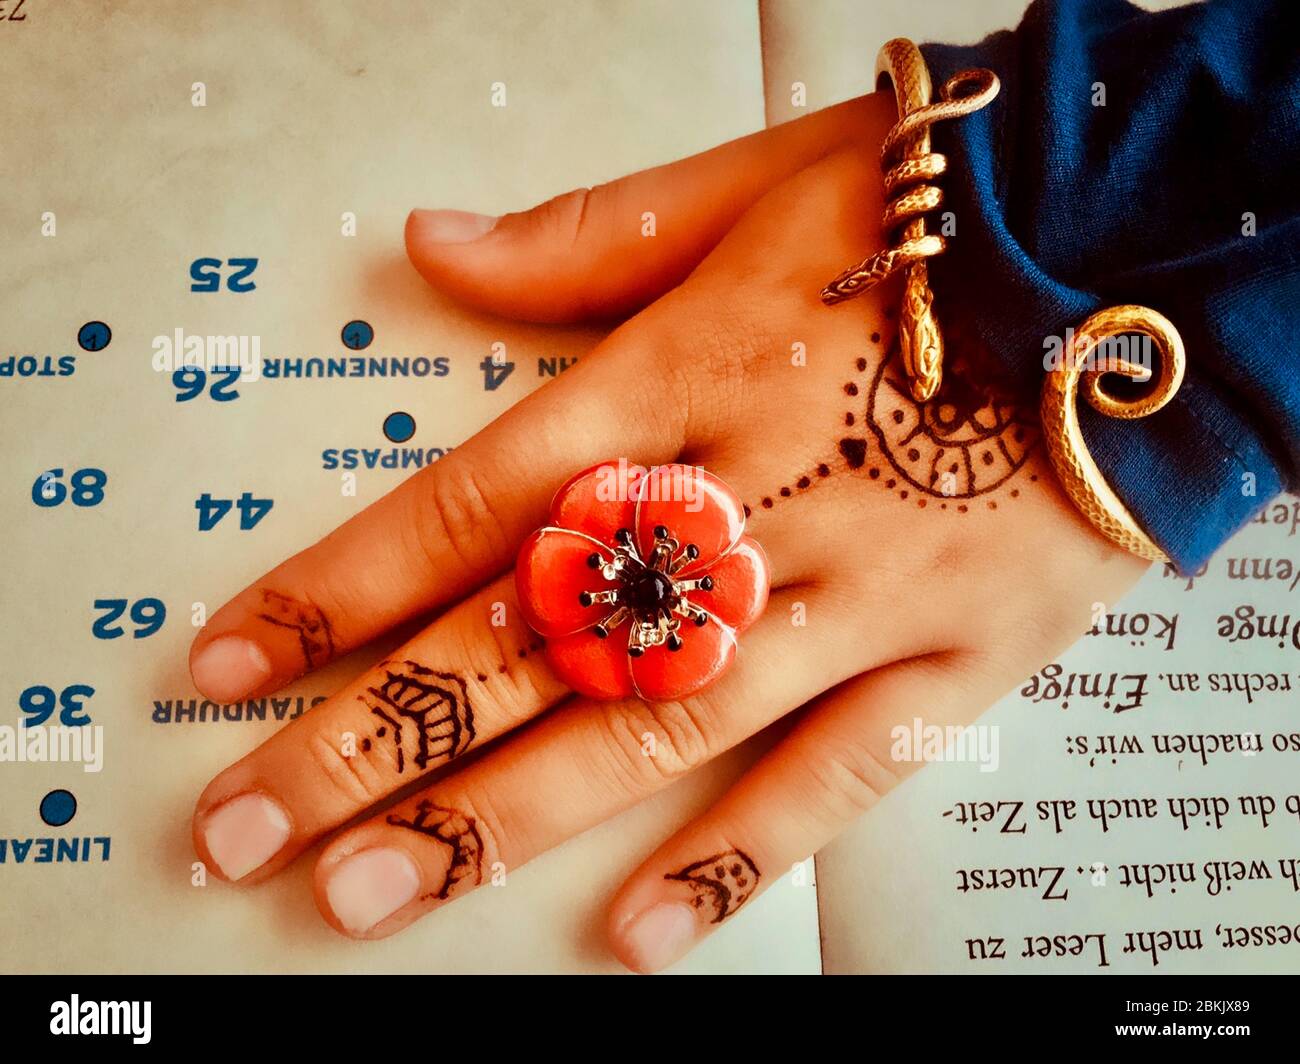 Hand of a girl with striking ring and bracelet, as well as a henna tattoo lying on an opened bookrl Stock Photo